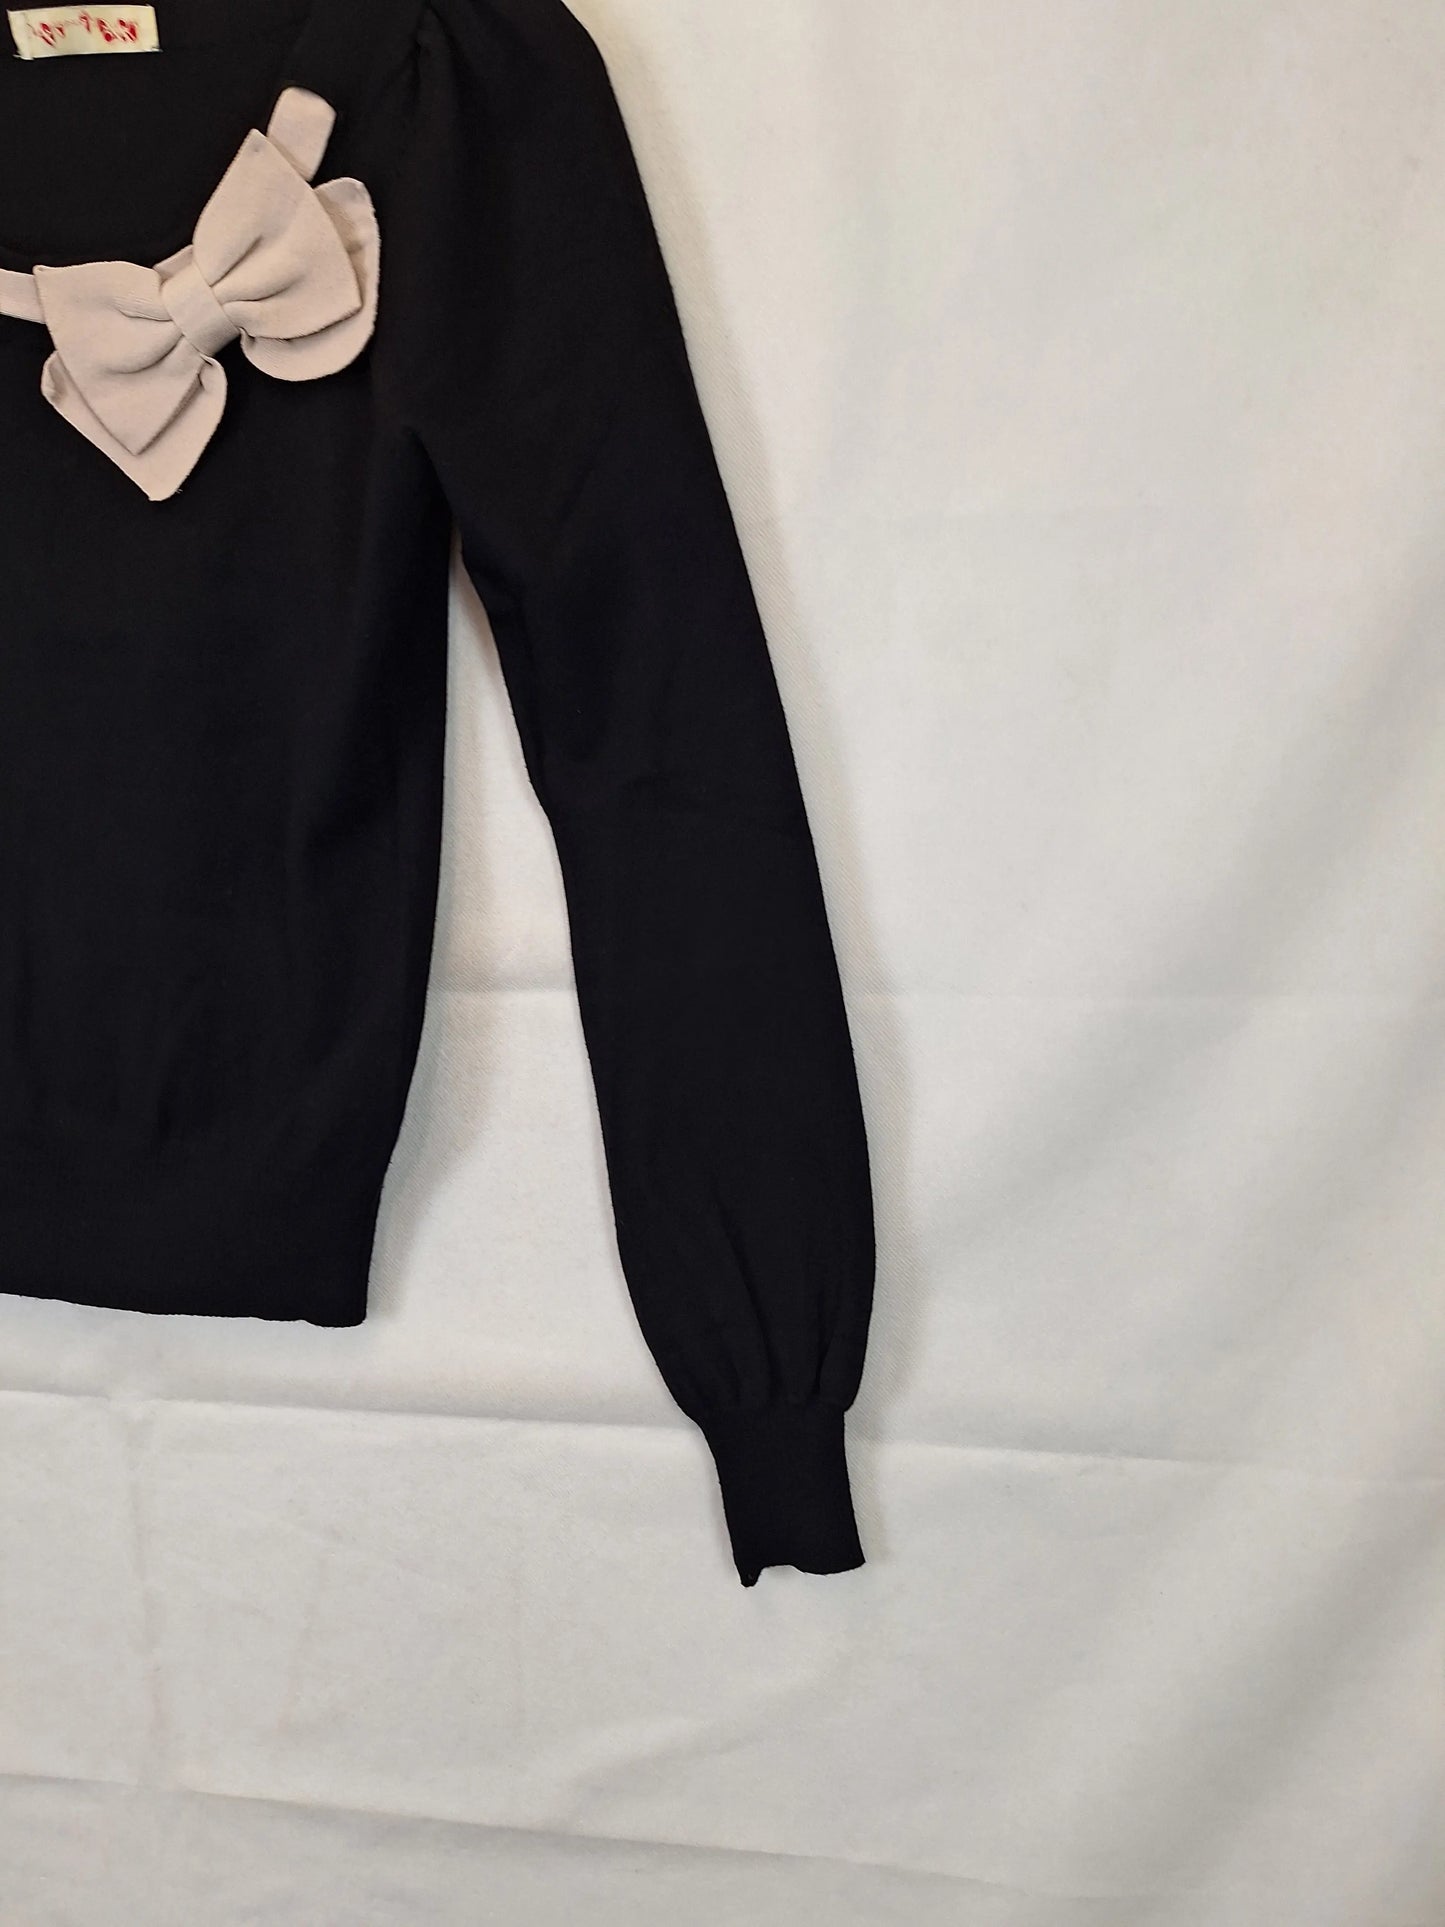 Alannah Hill Preppy Bow Knit Jumper Size 10 by SwapUp-Online Second Hand Store-Online Thrift Store